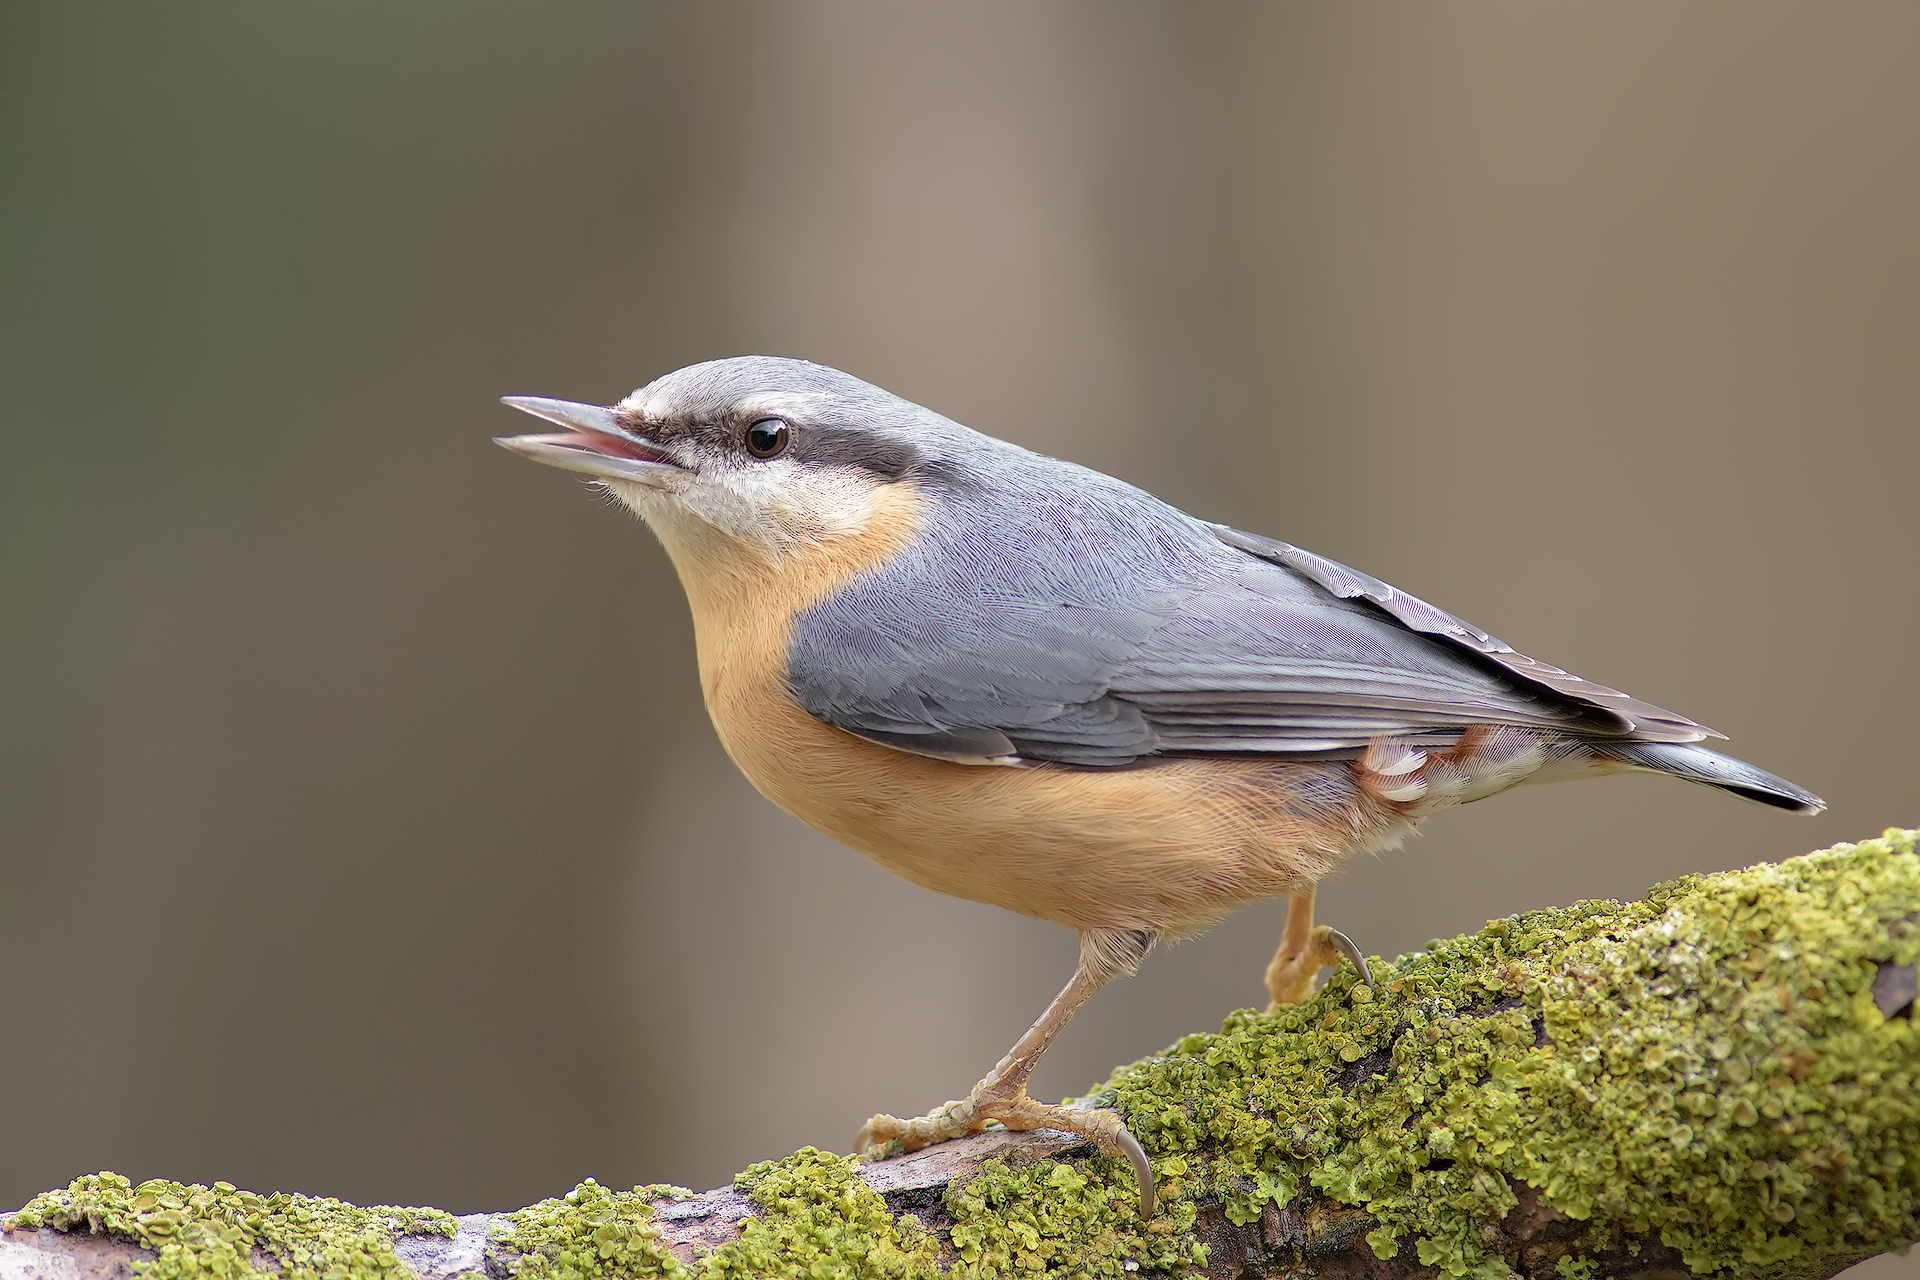 Face to face (1.5m) with Nuthatch...